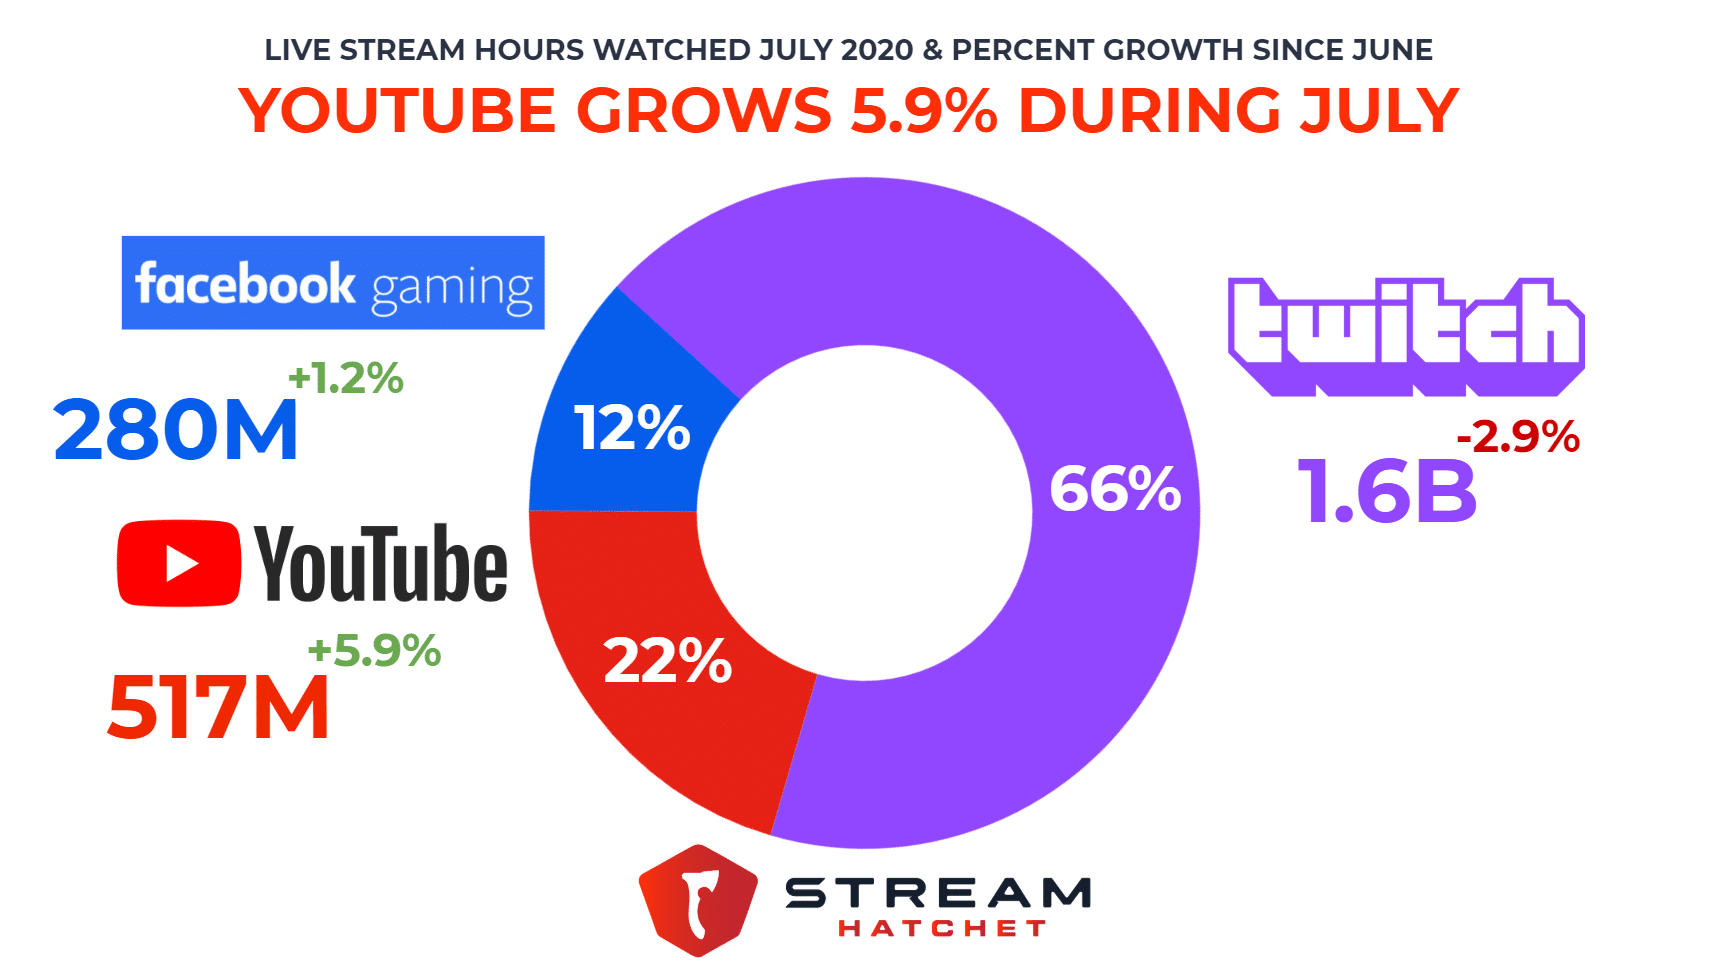 YouTube Stealing Live Streaming Market Share